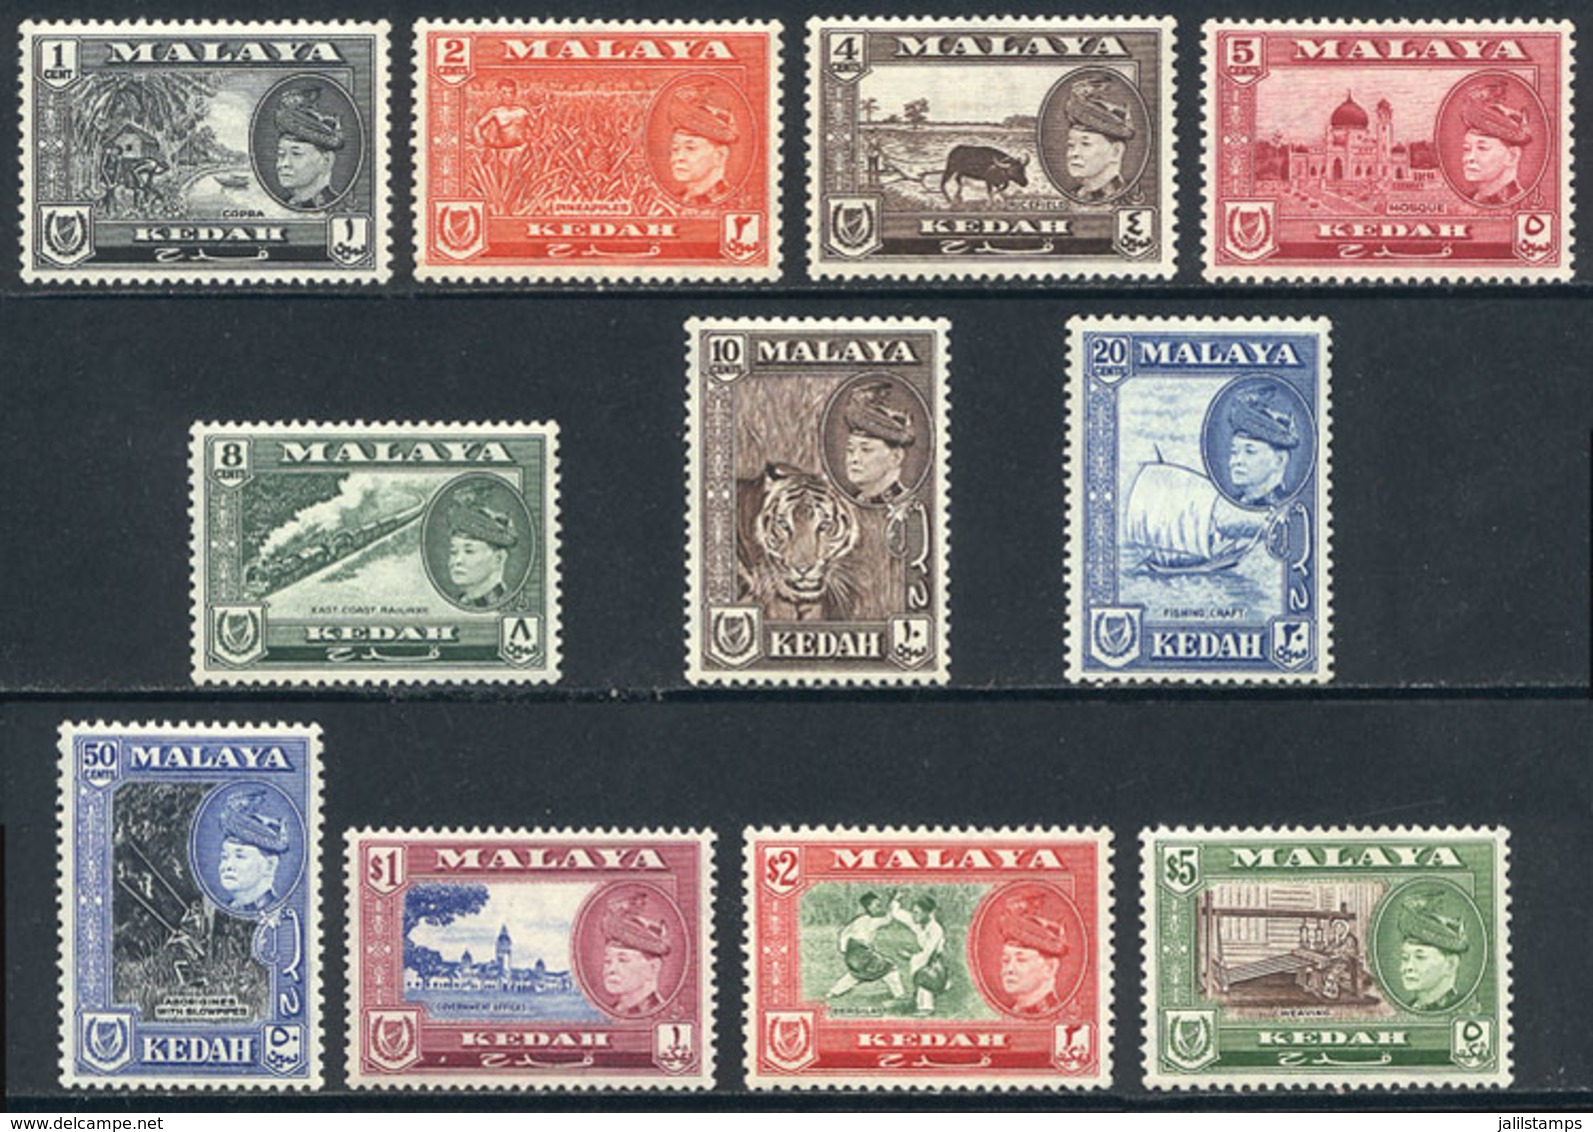 1546 MALAYA: Sc.83/93, 1957 Animals, Ships, Trains, Sports And Other Topics, Complete Set Of 11 Unmounted Values, Excell - Kedah